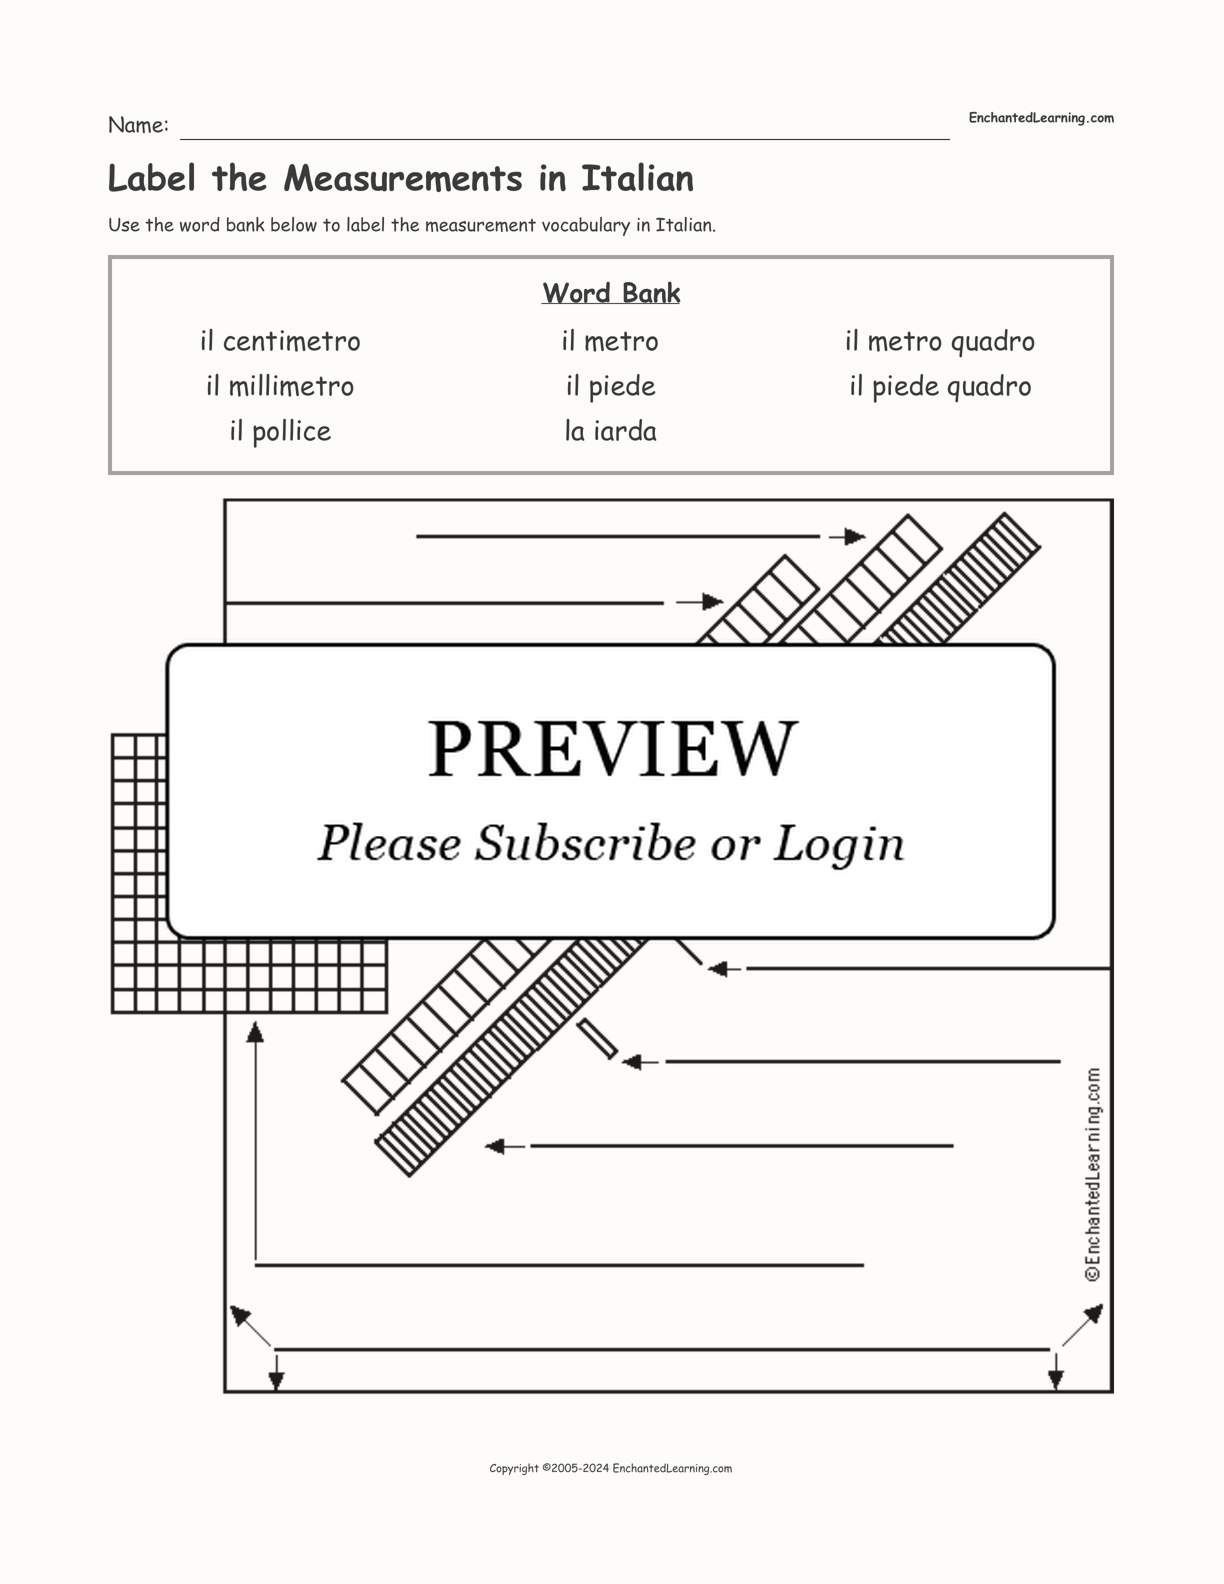 Label the Measurements in Italian interactive worksheet page 1